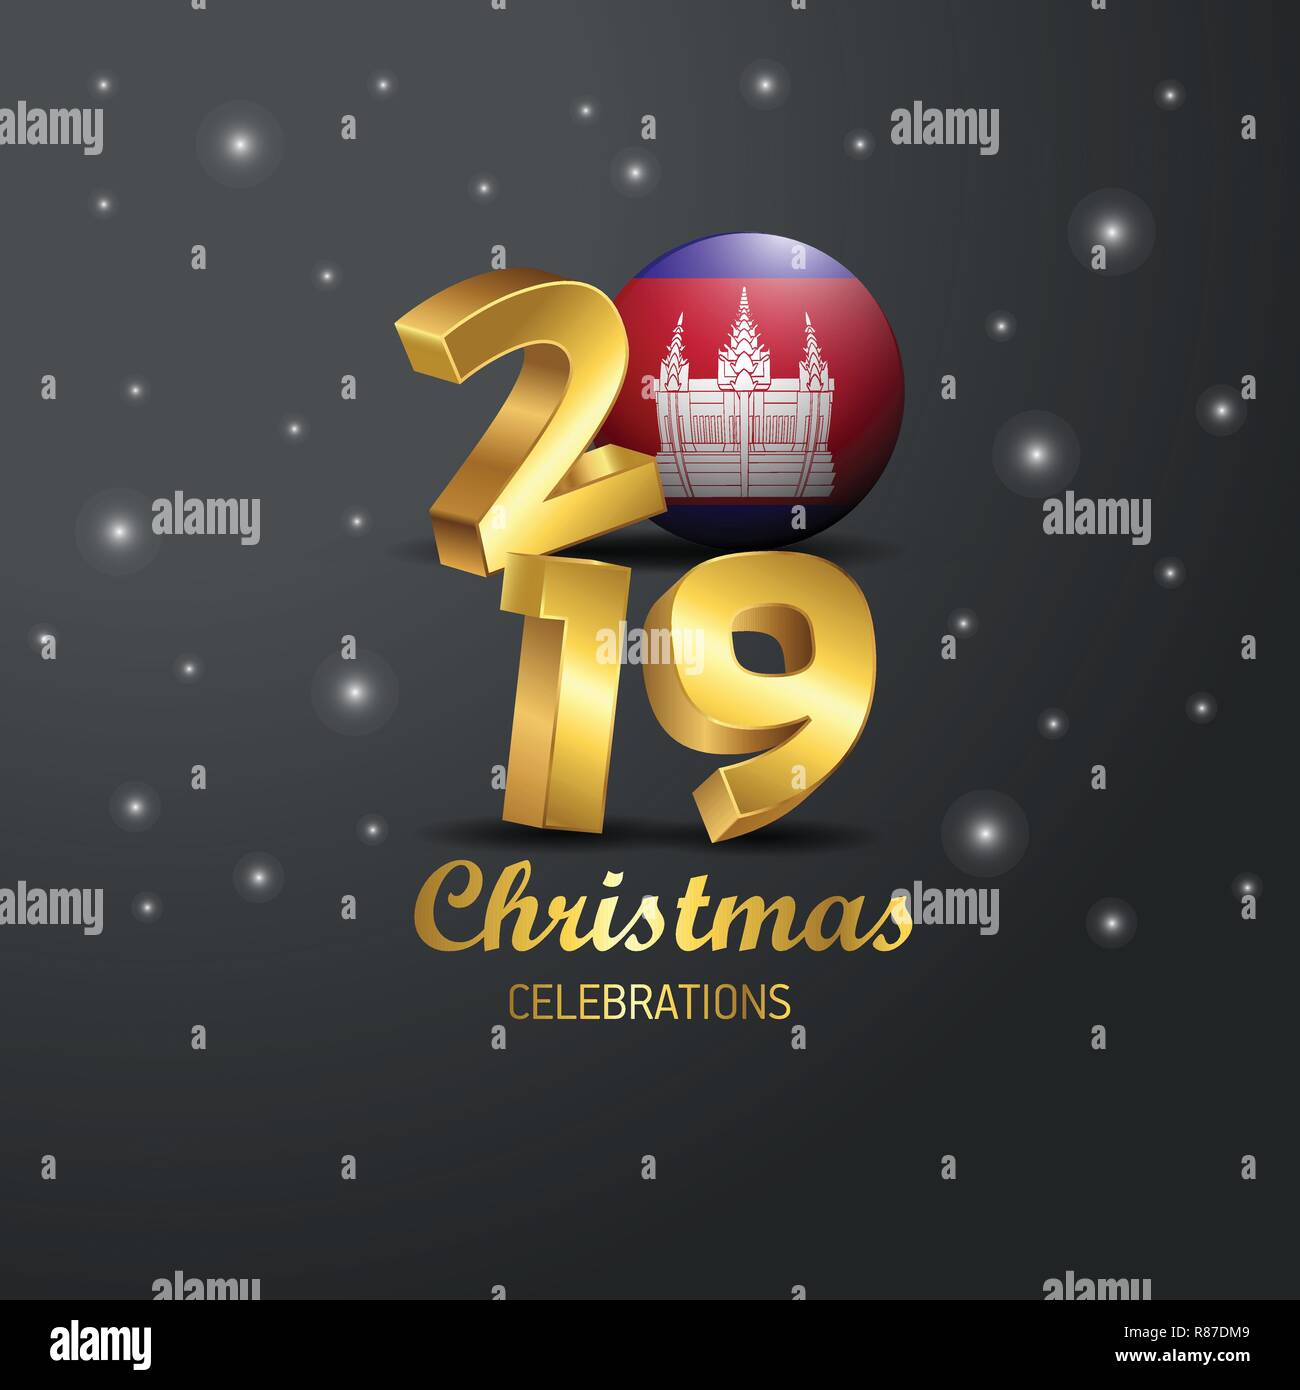 Cambodia Flag 2019 Merry Christmas Typography. New Year Abstract Celebration background Stock Vector